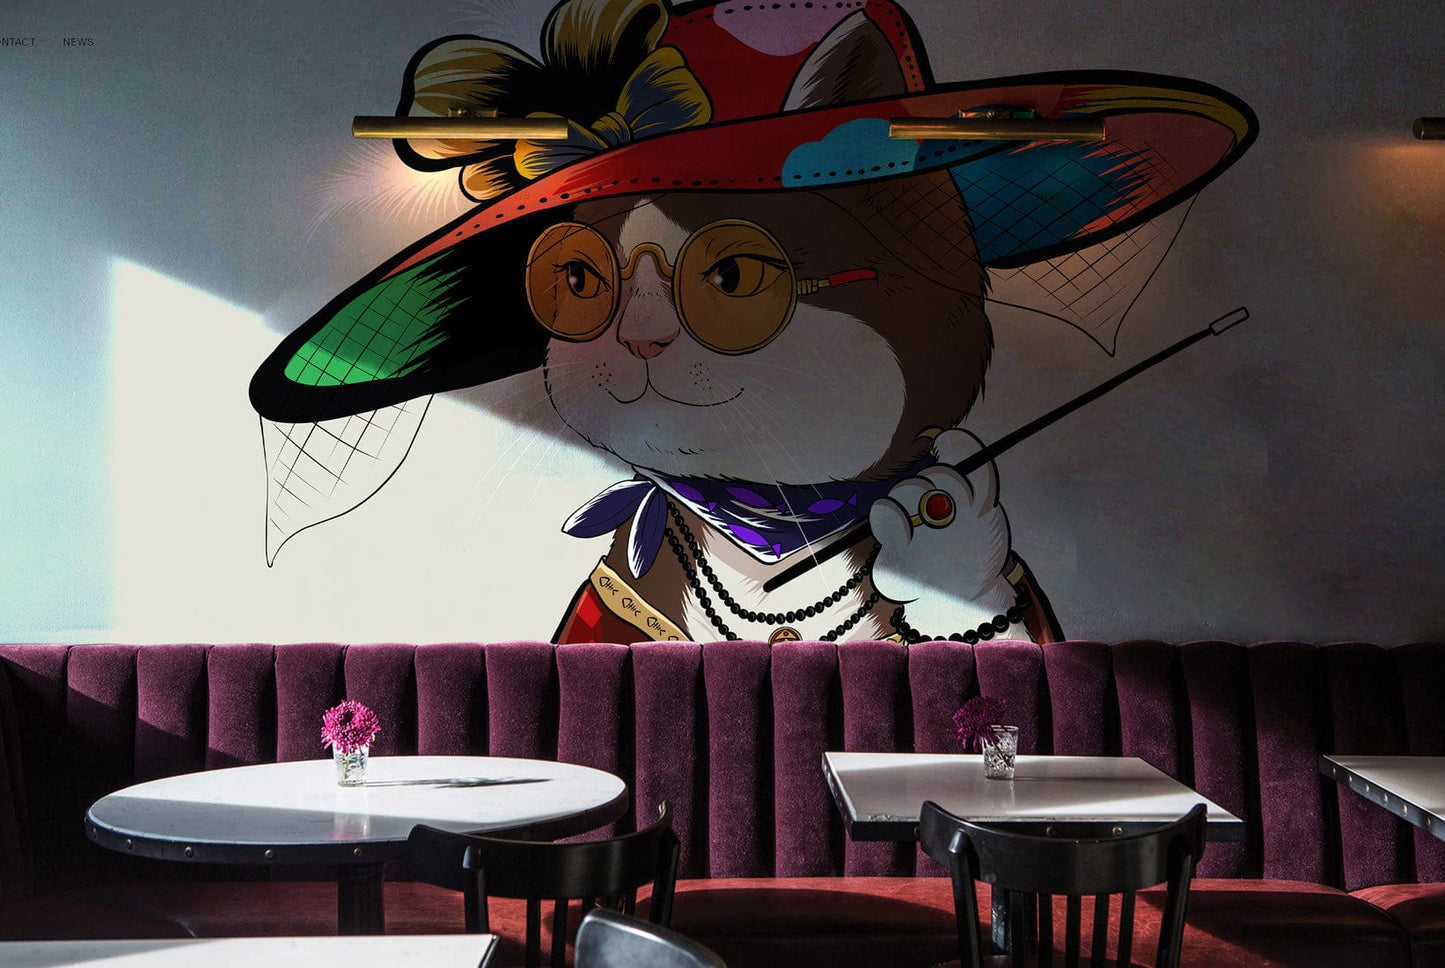 Wallpaper mural featuring a well-dressed lady cat for use in the decoration of restaurants.